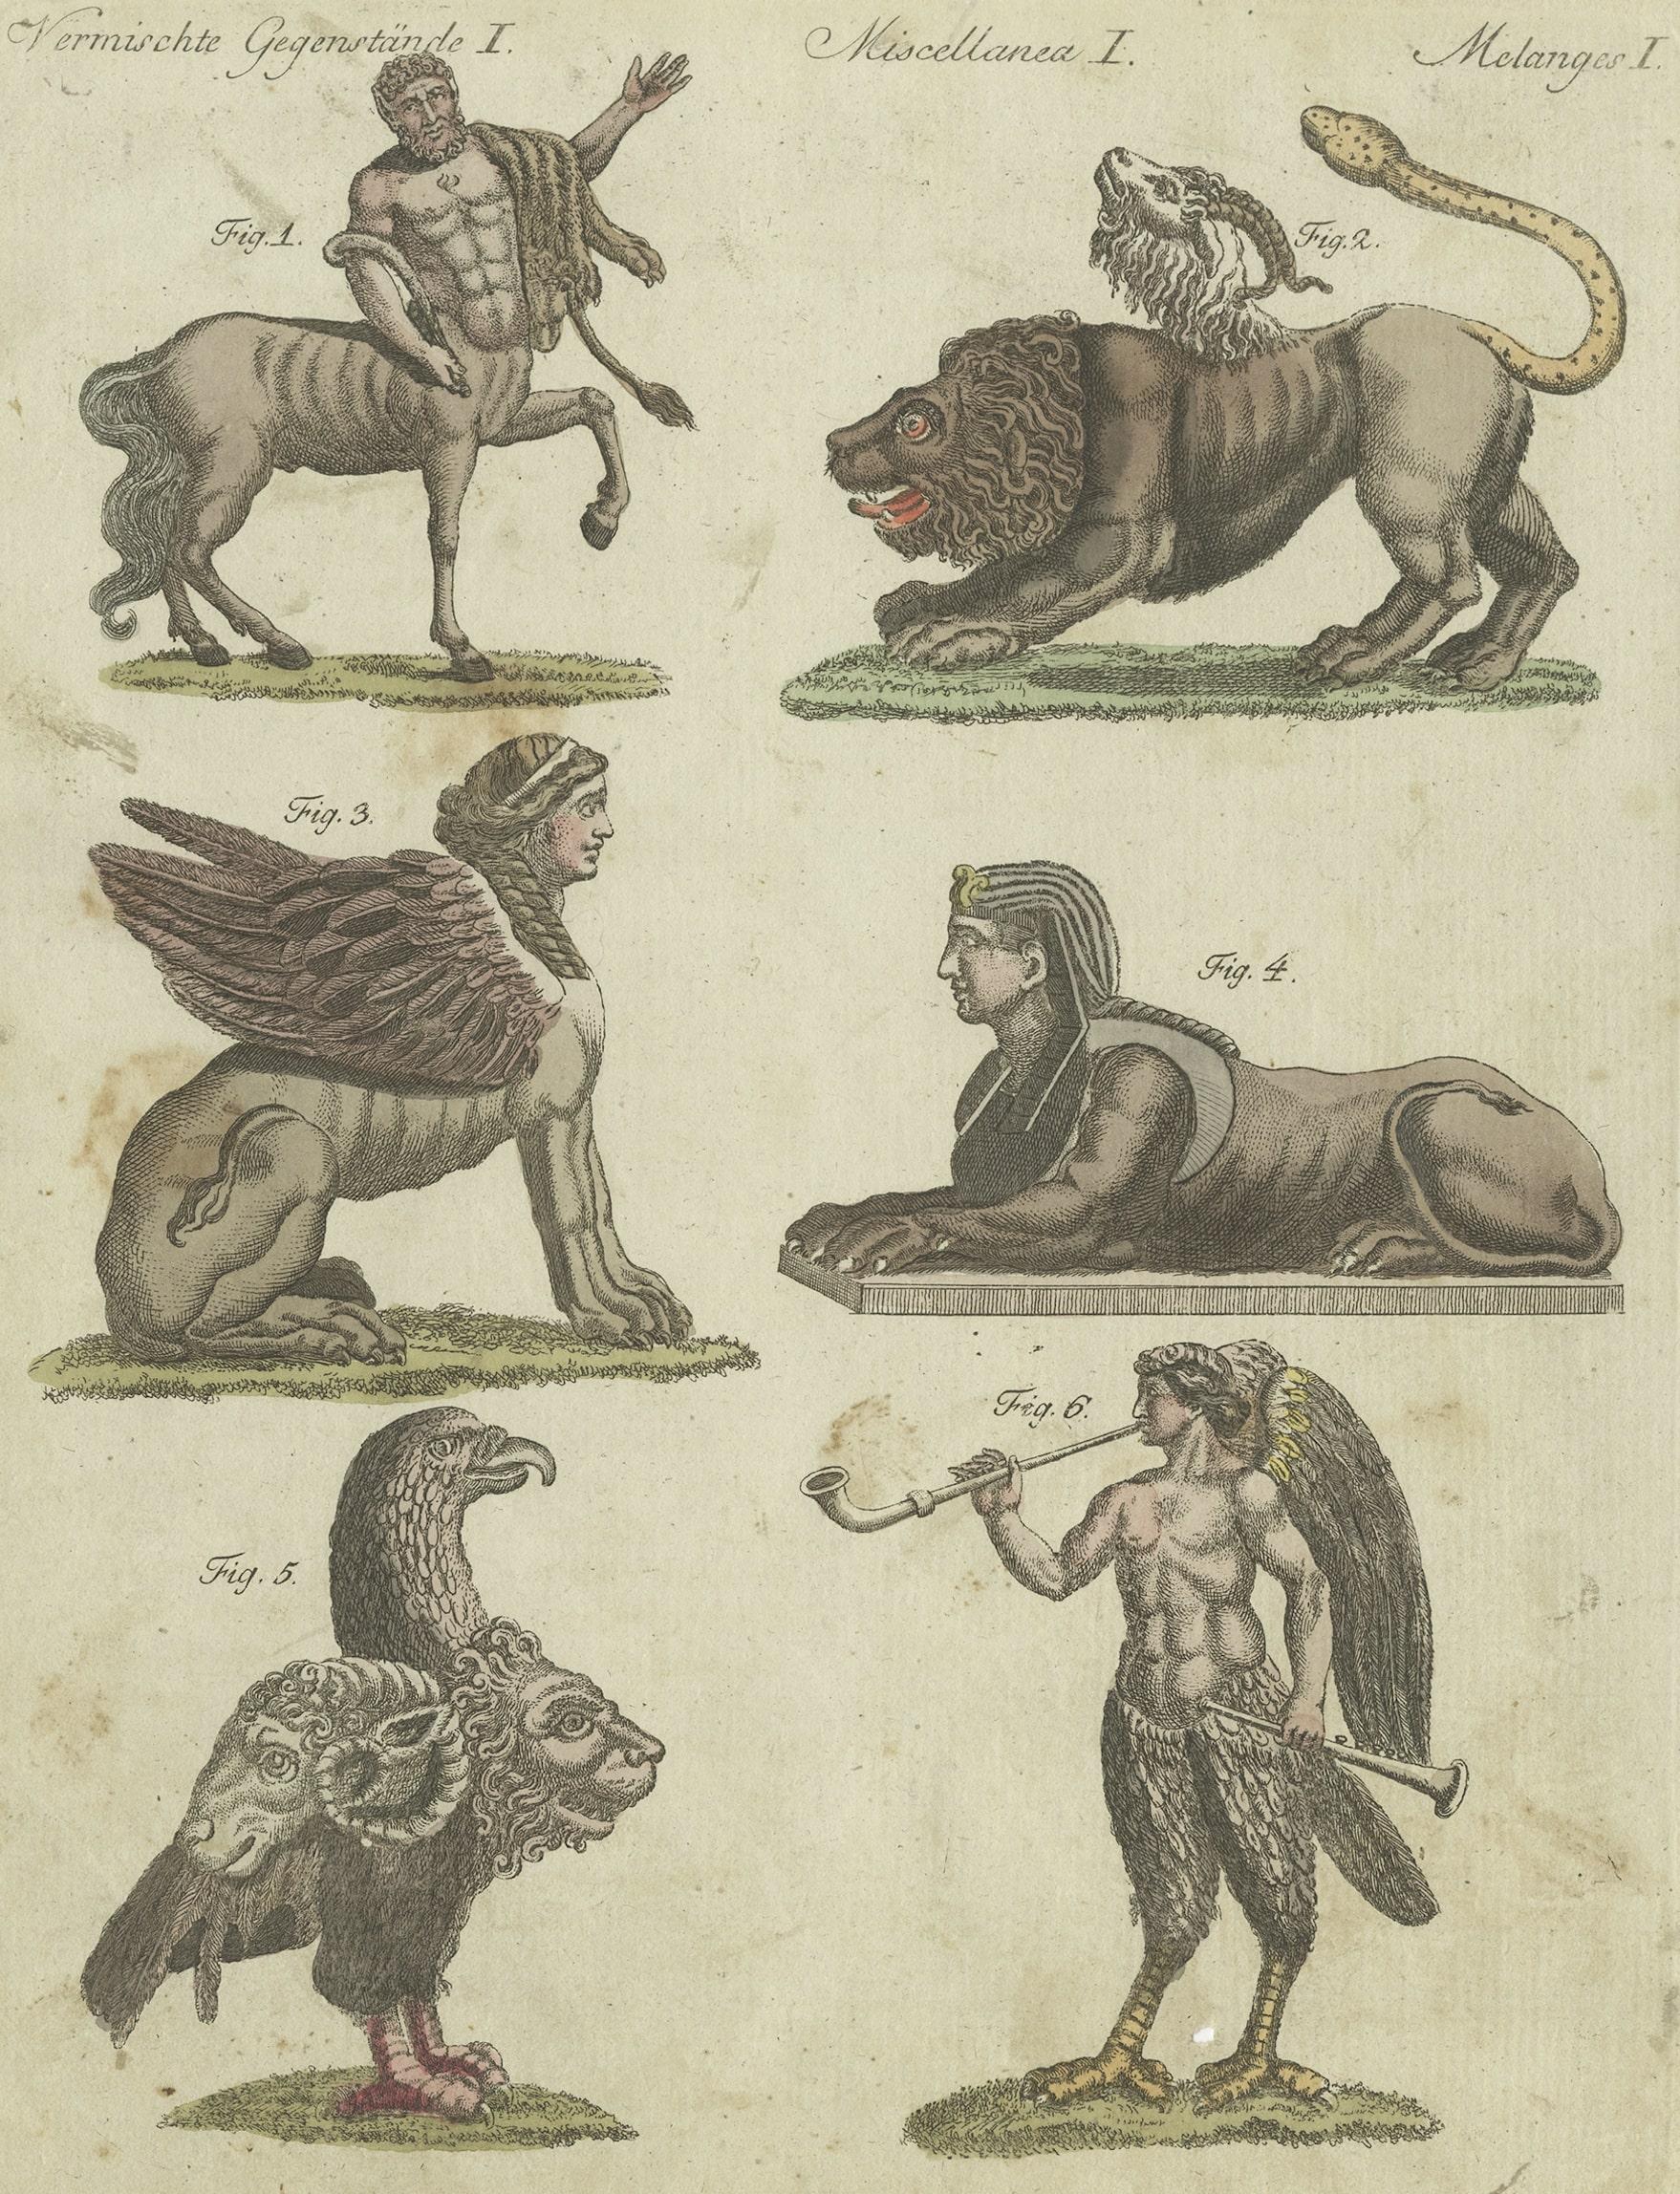 Original print of fabulous animals in mythology. Includes the Centaur, the Chimera, the Greek Sphinx, the Egyptian Sphinx, the Gryllus, the Sirens. This print originates from 'Bilderbuch fur Kinder' by F.J. Bertuch. Published circa 1800.